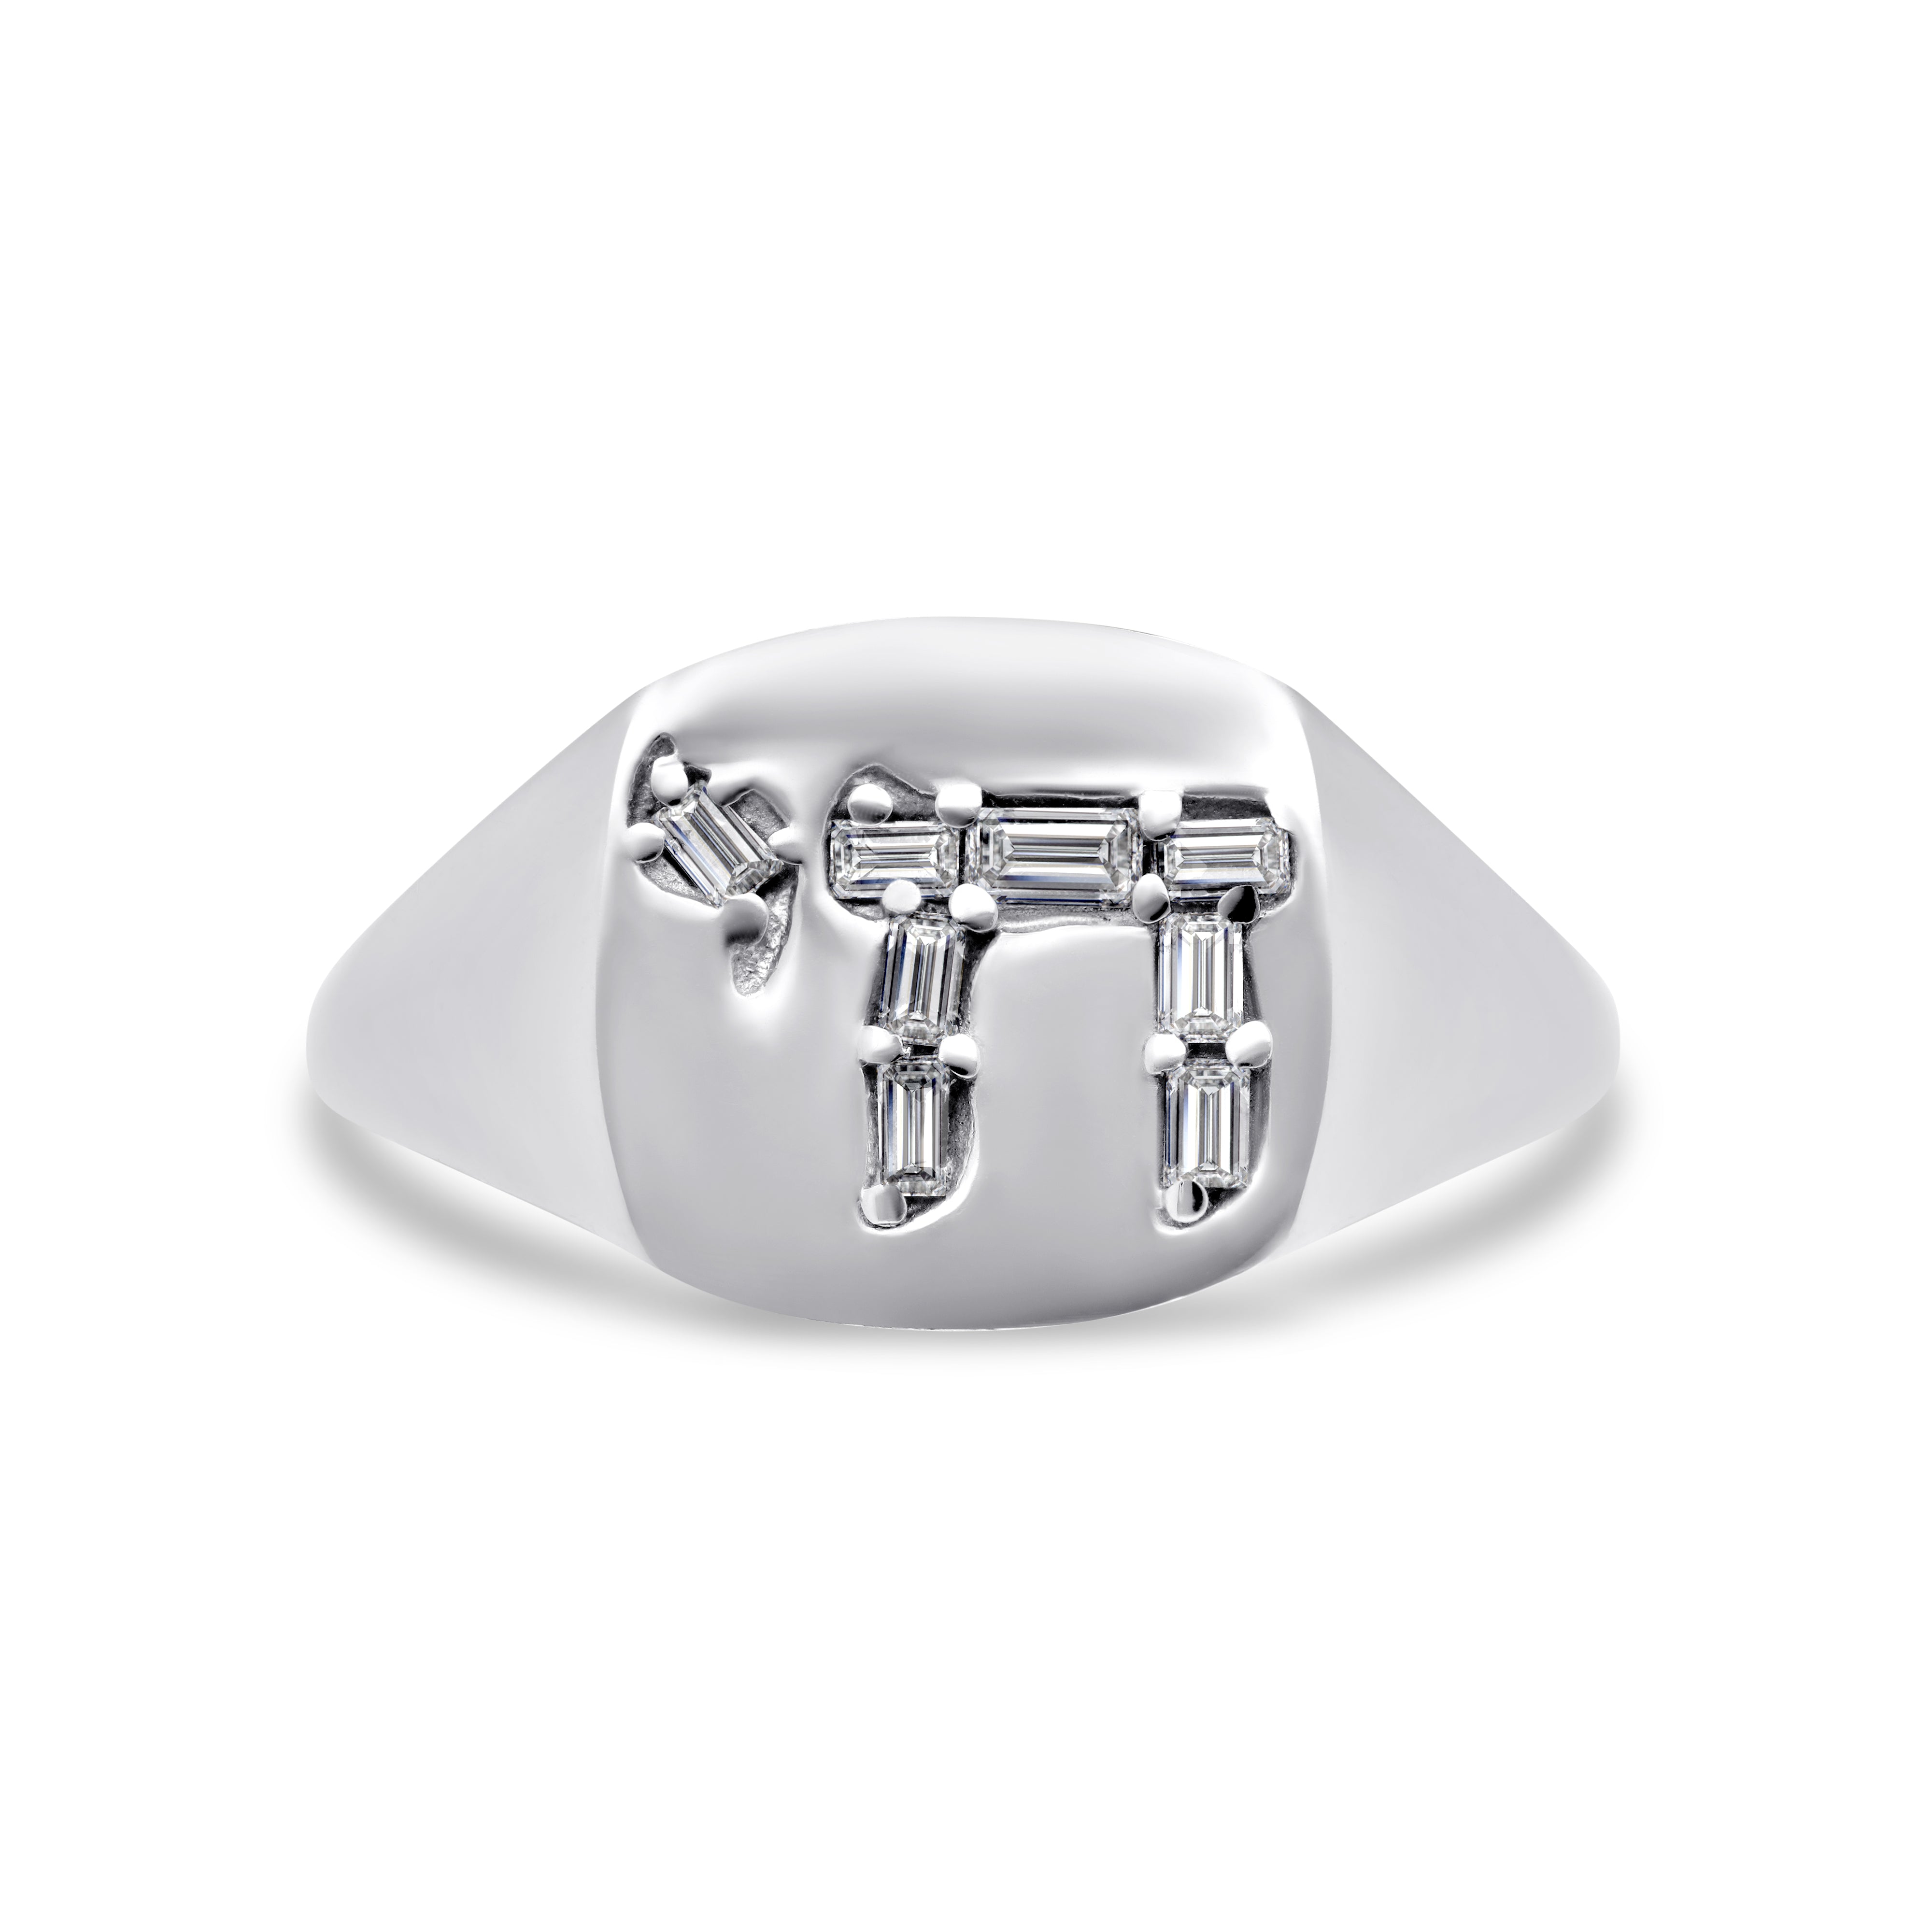 The L'Chaim Signet Pinky Ring